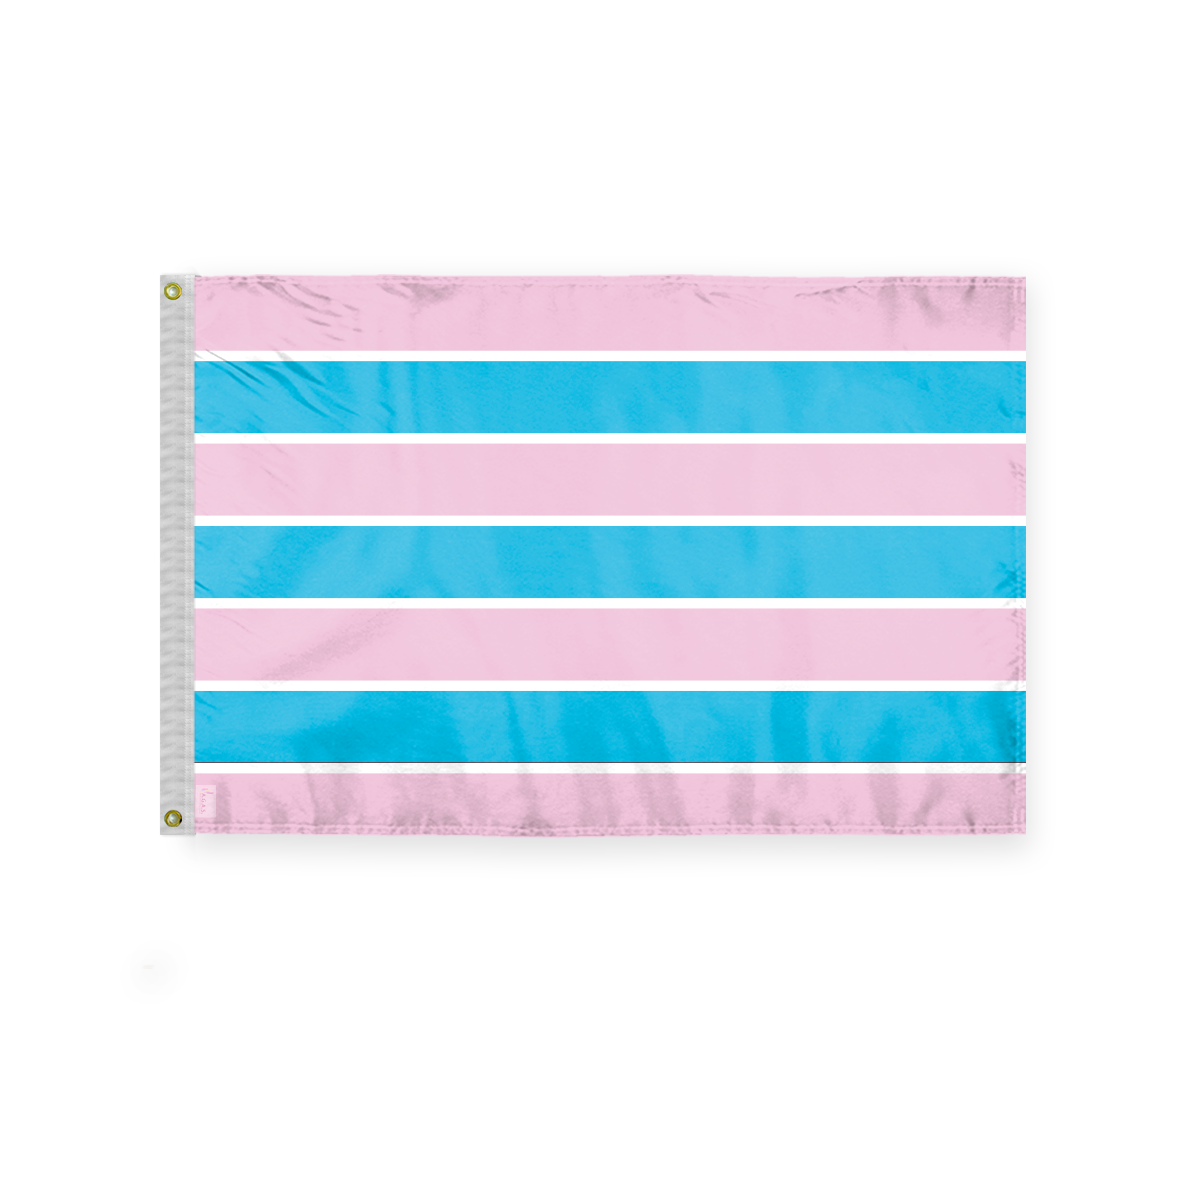 AGAS Transsexual Pride Flag 3x5 Ft - Double Sided Polyester